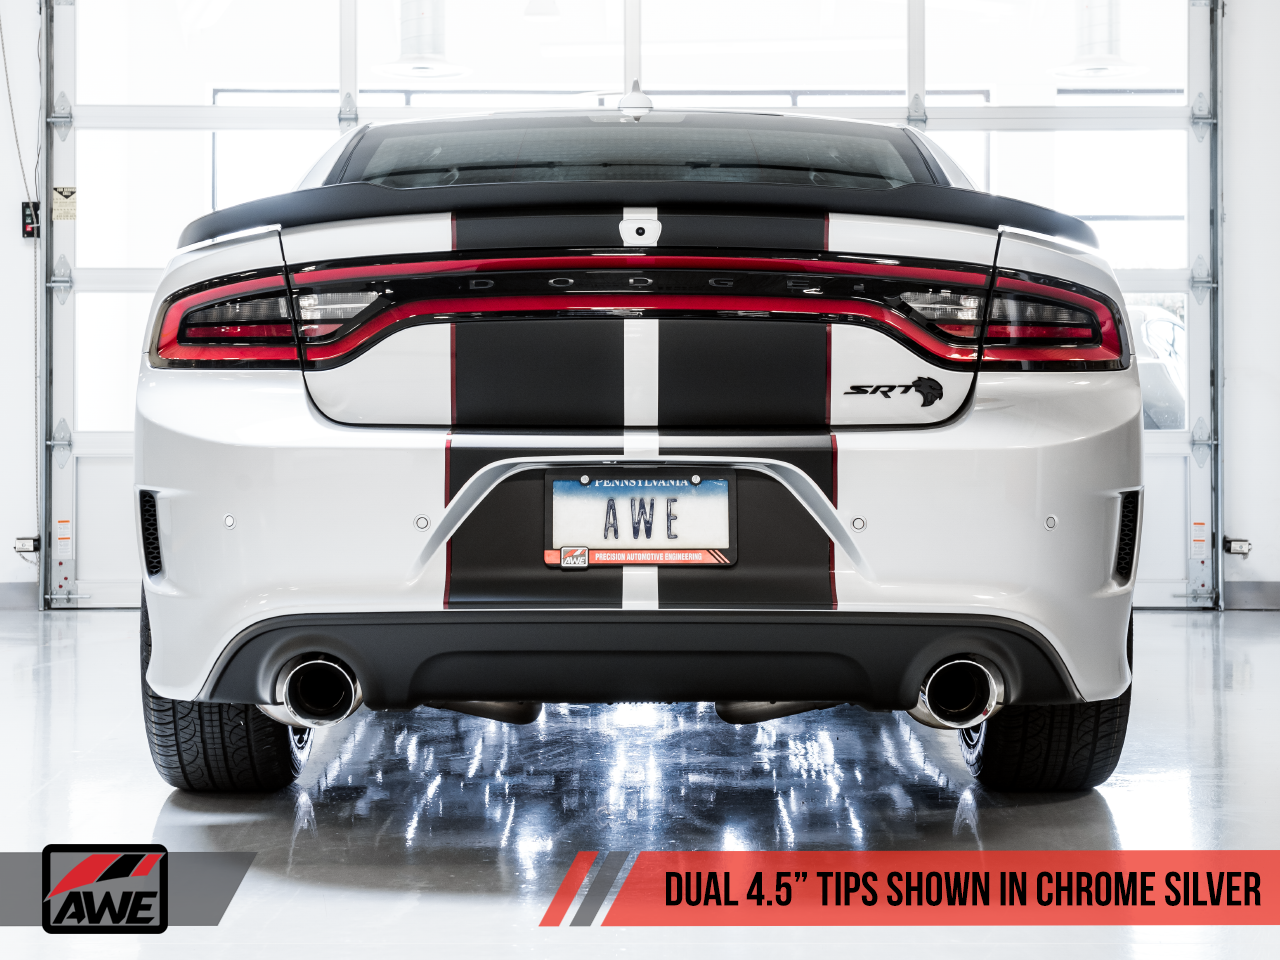 AWE Touring Edition Exhaust for 15+ Charger 6.4 / 6.2 SC - Non-Resonated - Diamond Black Tips